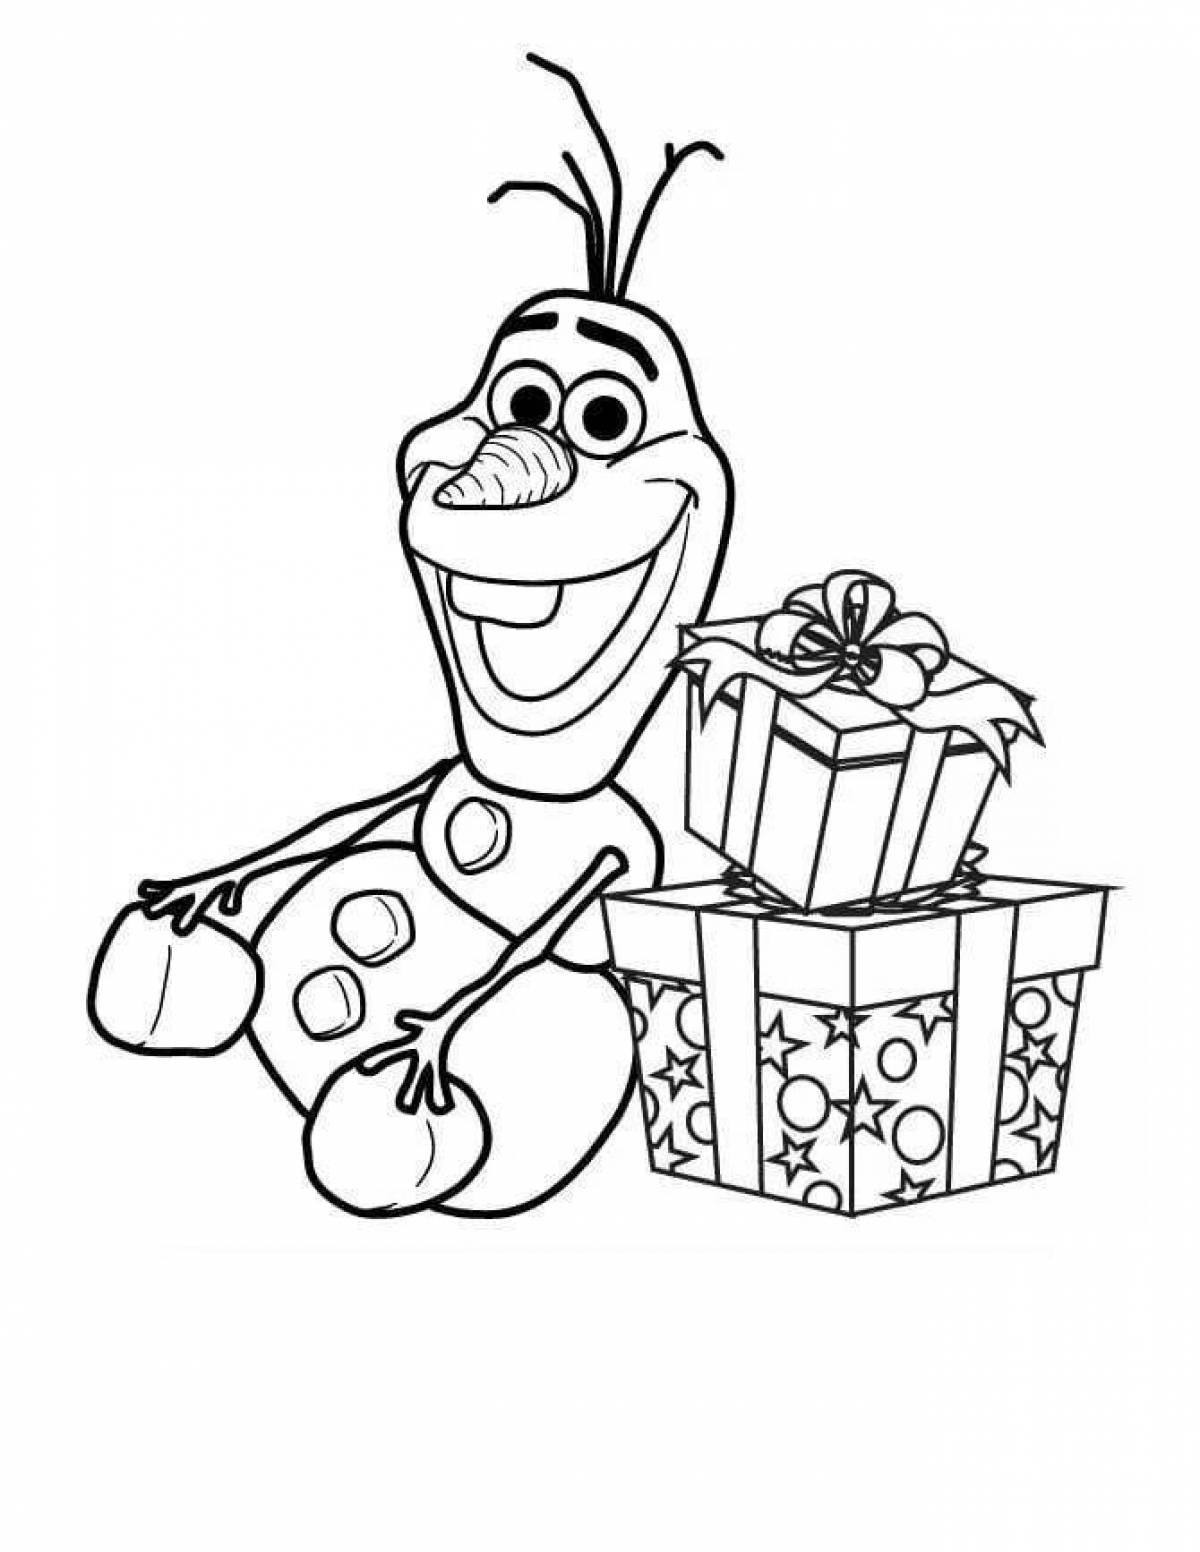 Olaf's Frozen Glowing Coloring Page